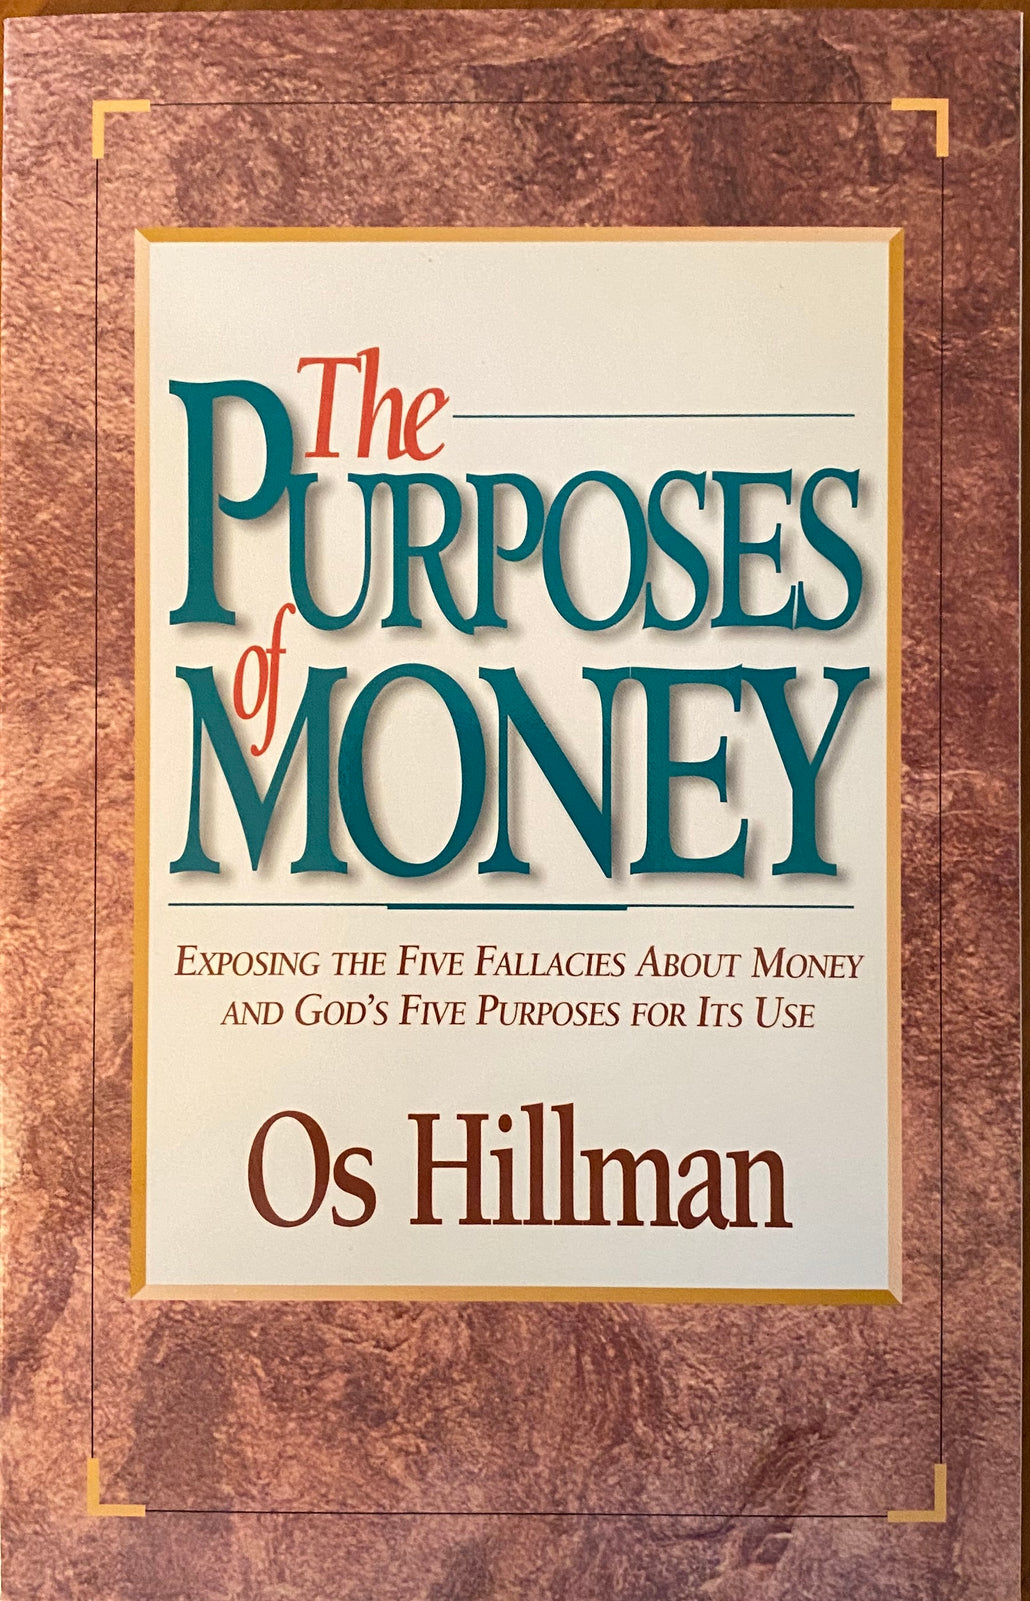 Purposes of Money: Exposing The Five Fallacies Of About Money And God’s Five Purposes Of Its Use